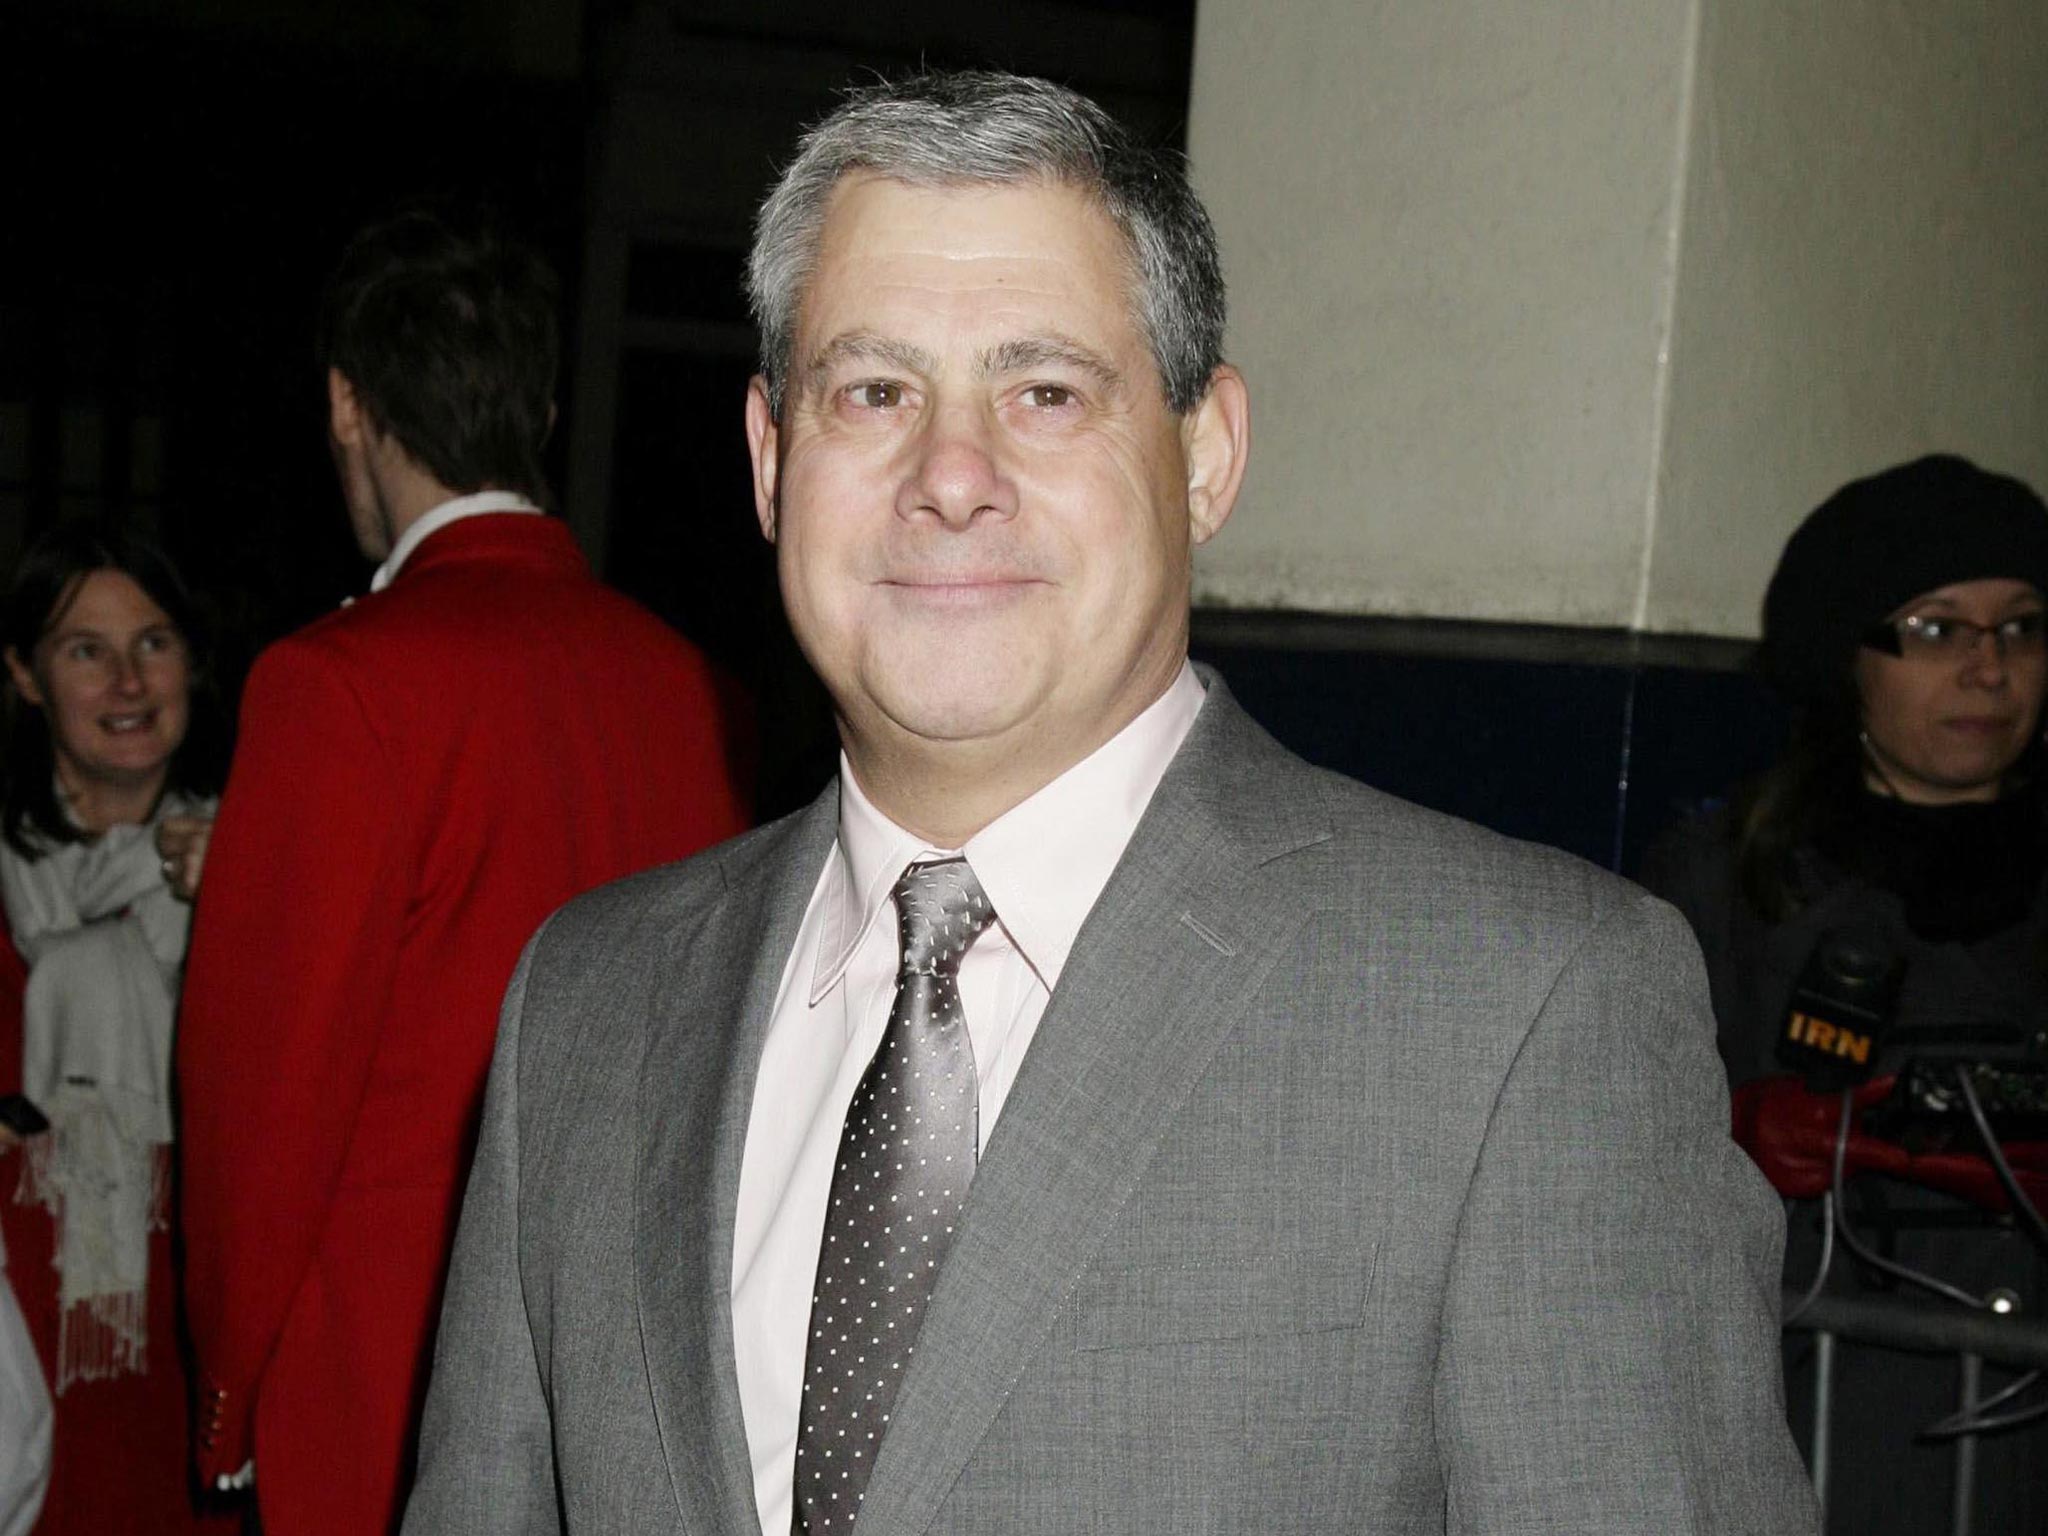 Sir Cameron Mackintosh has pledged £50,000 to the Young and Homeless Helpline appeal